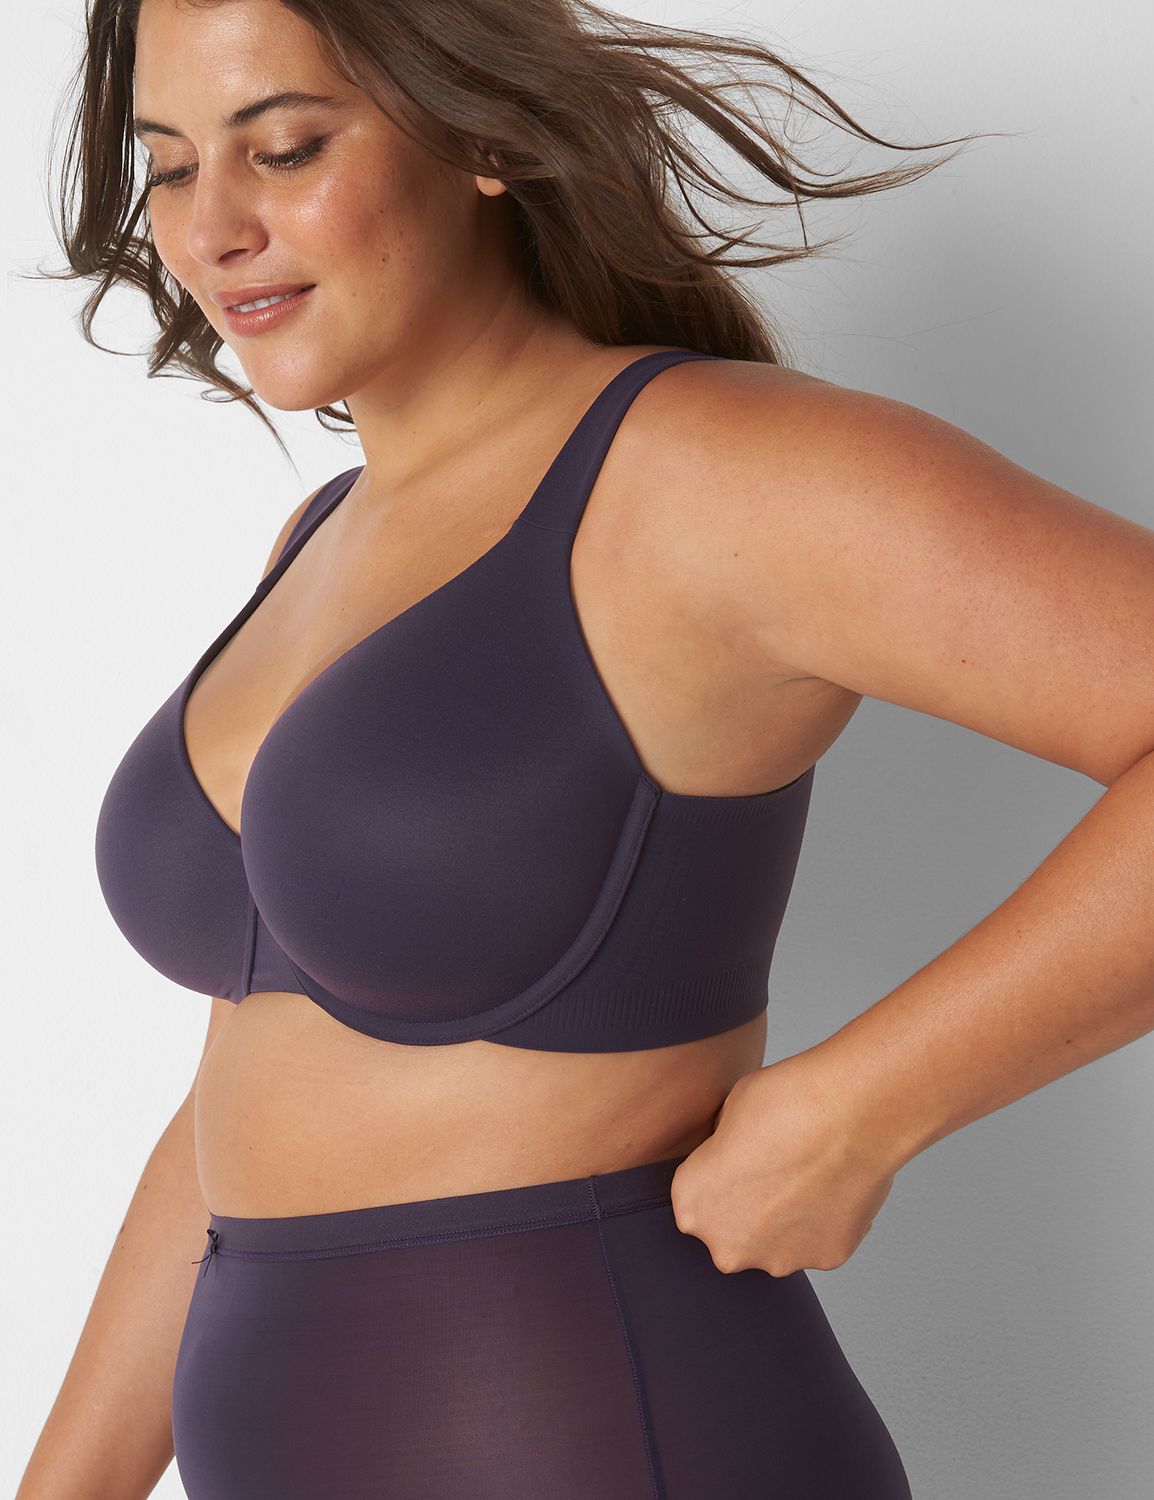 Cacique [] Comfort Luxe Lightly Lined Full Coverage Bra in Hydro- 46C Size  undefined - $30 New With Tags - From Melissa